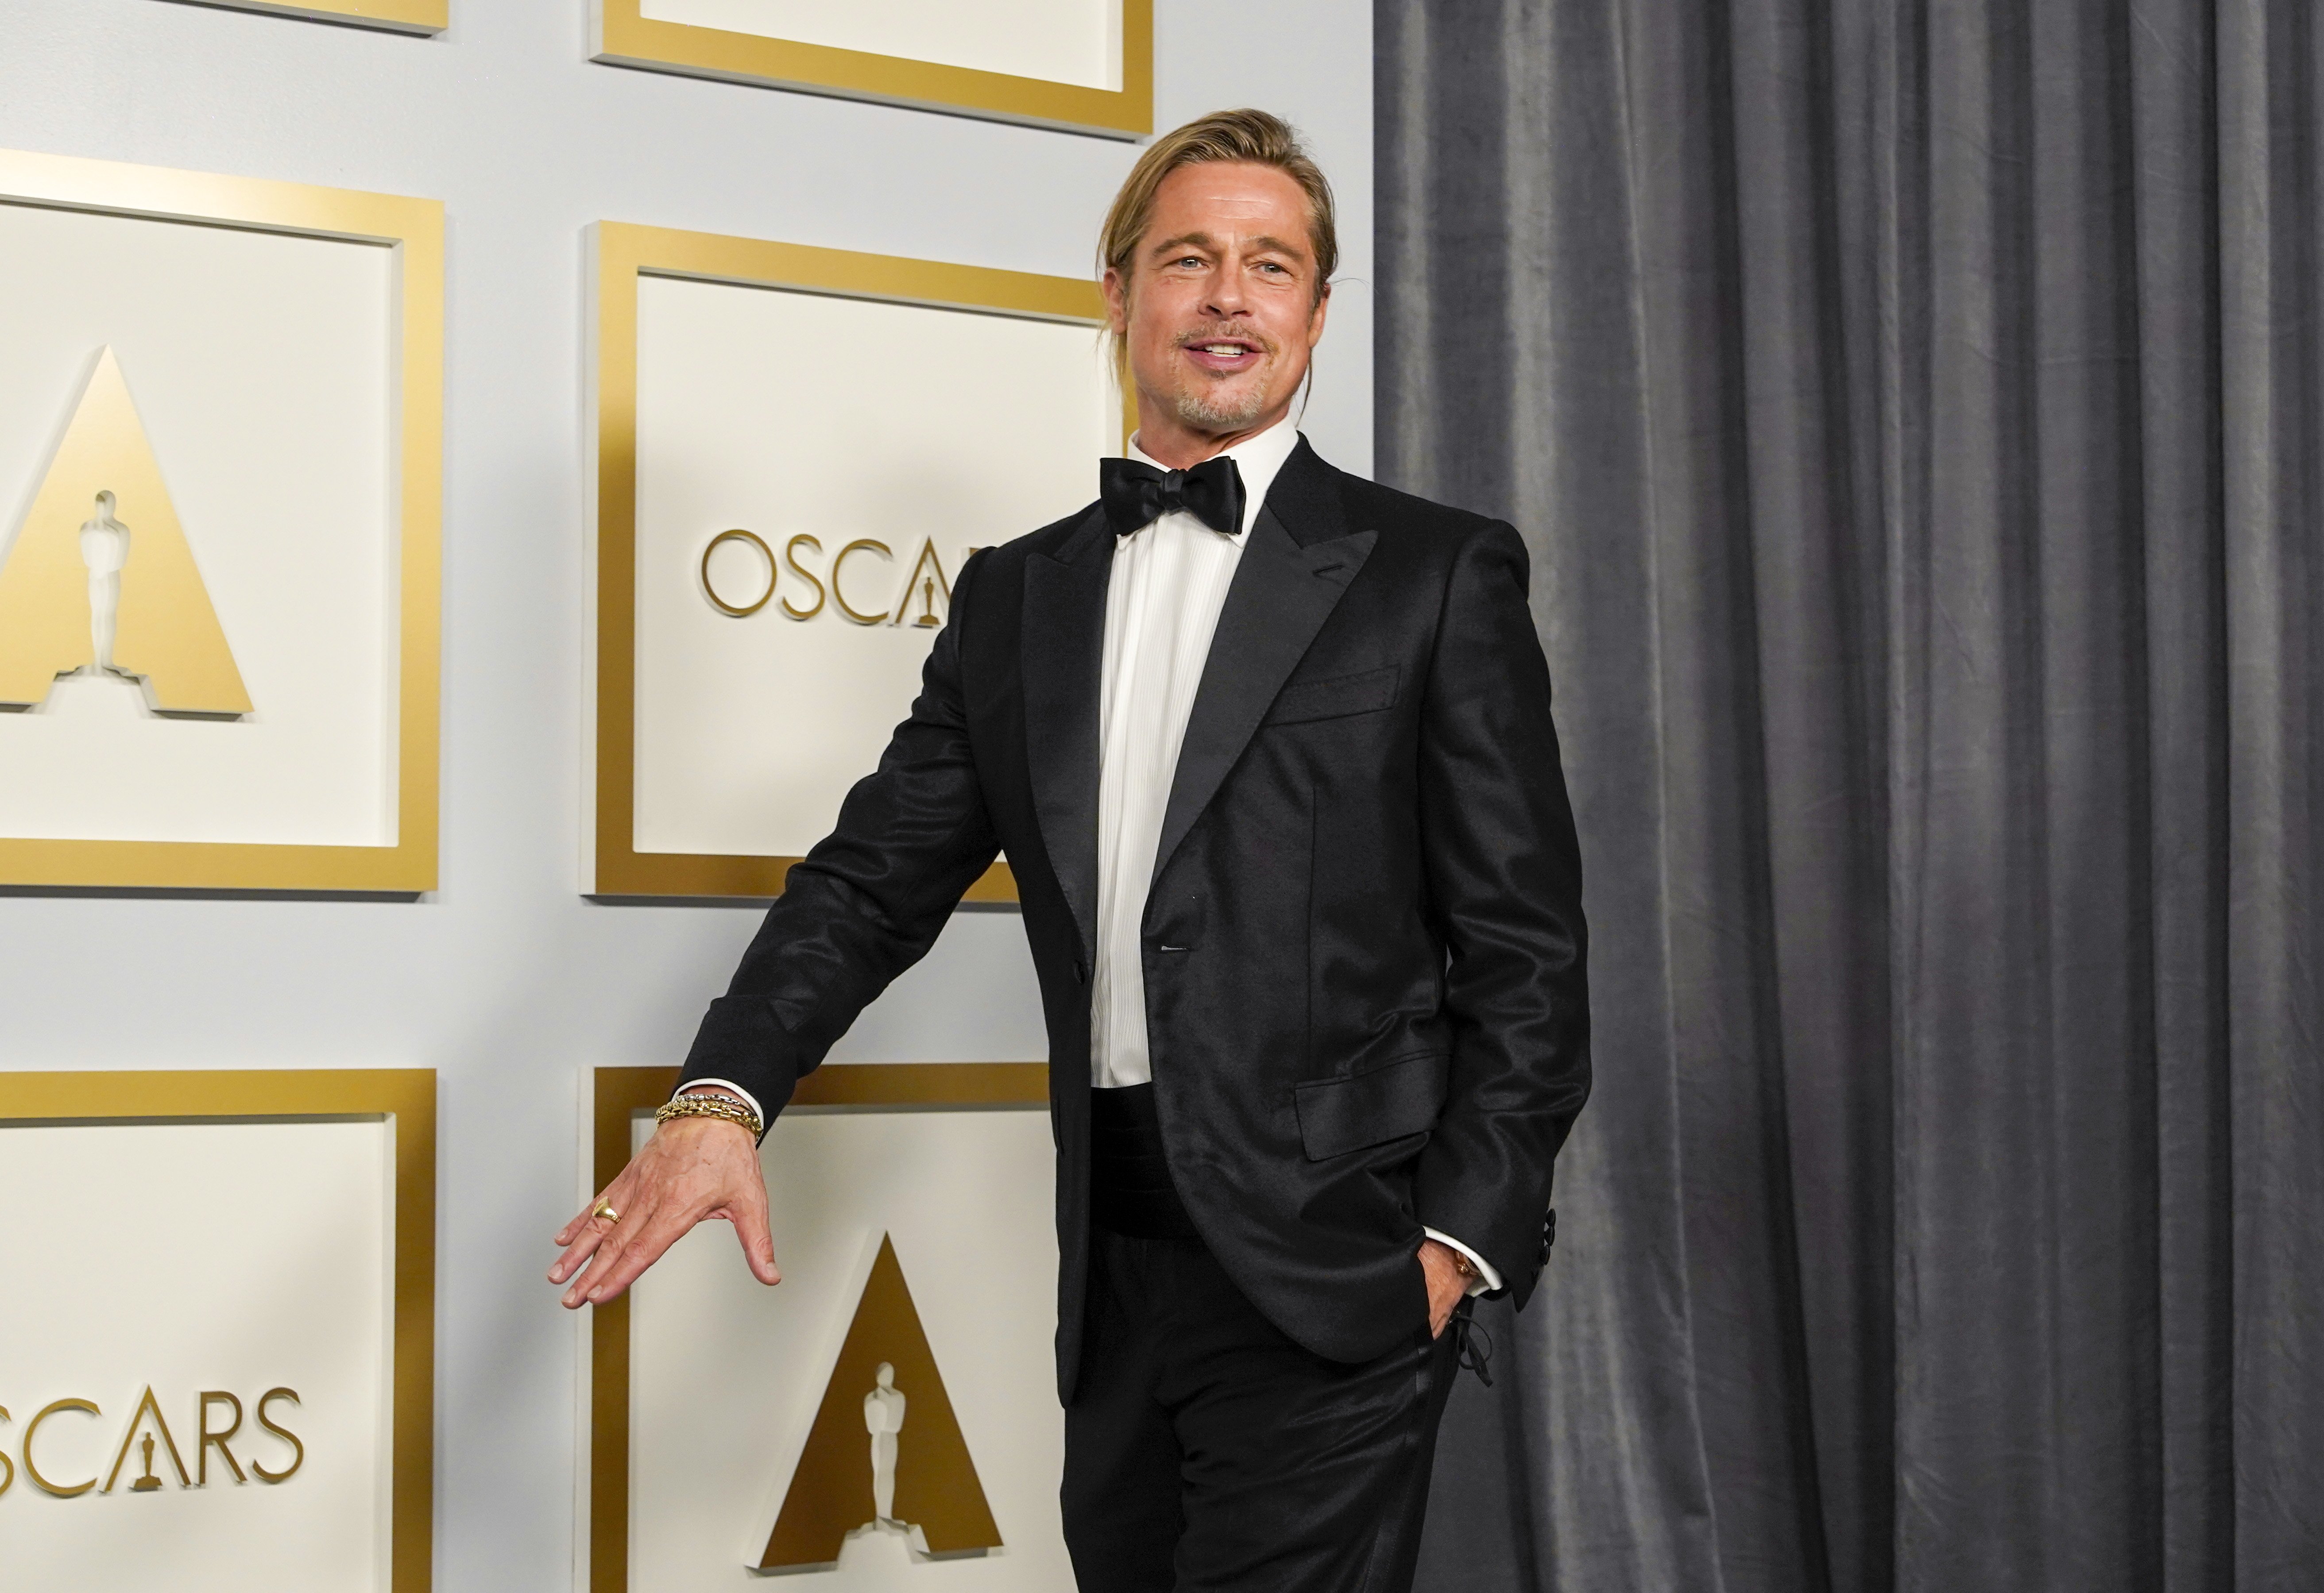 Brad Pitt at the 93rd Annual Academy Awards on April 25, 2021 | Source: Getty Images